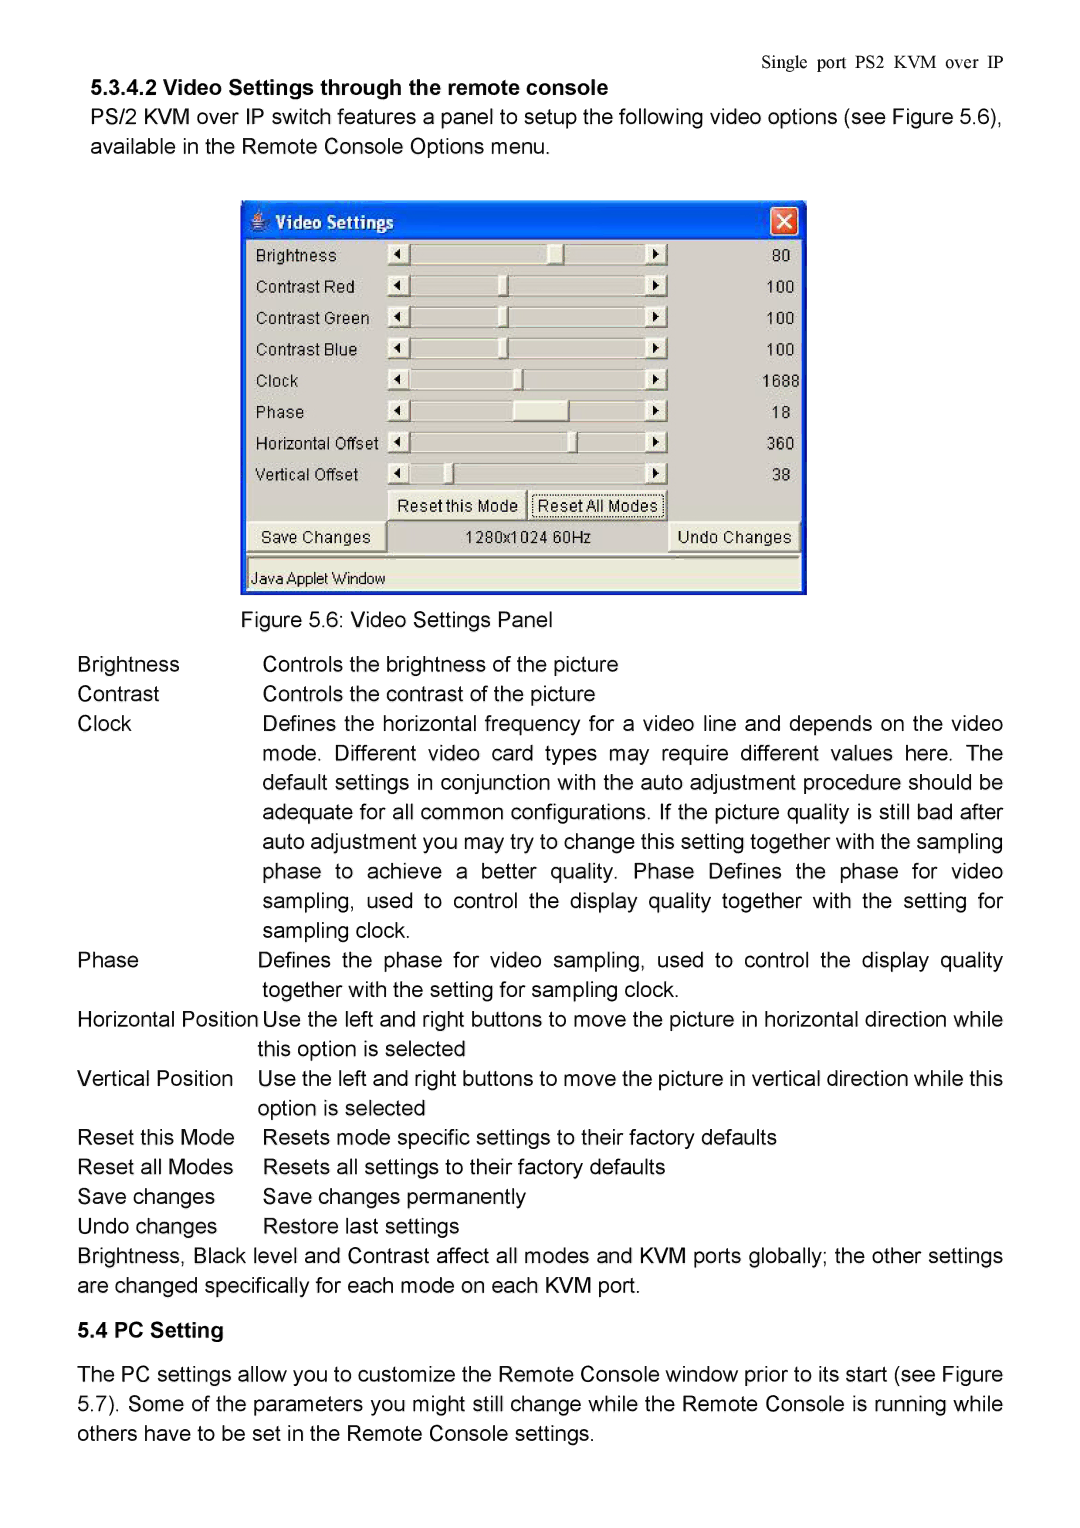 Avocent PS/2 KVM manual Video Settings through the remote console, PC Setting 